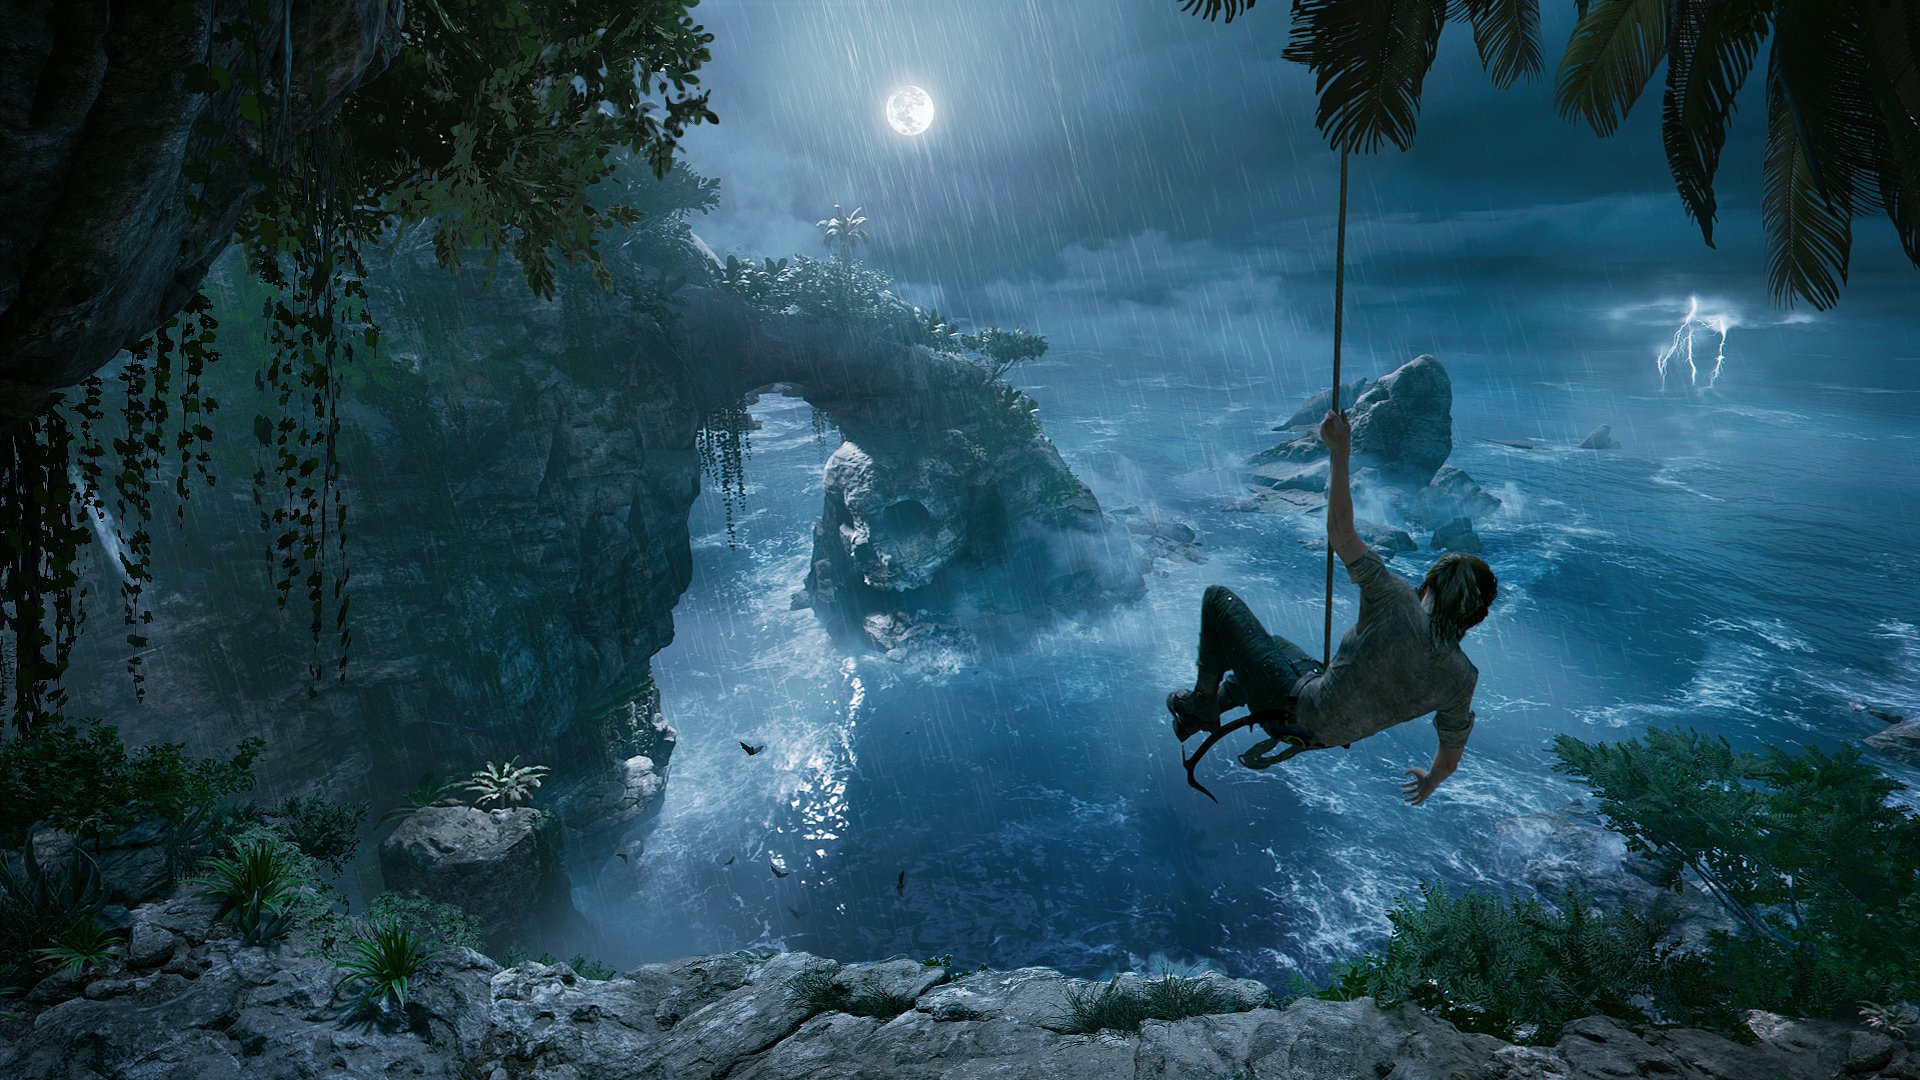 Shadow of the Tomb Raider (Steam)